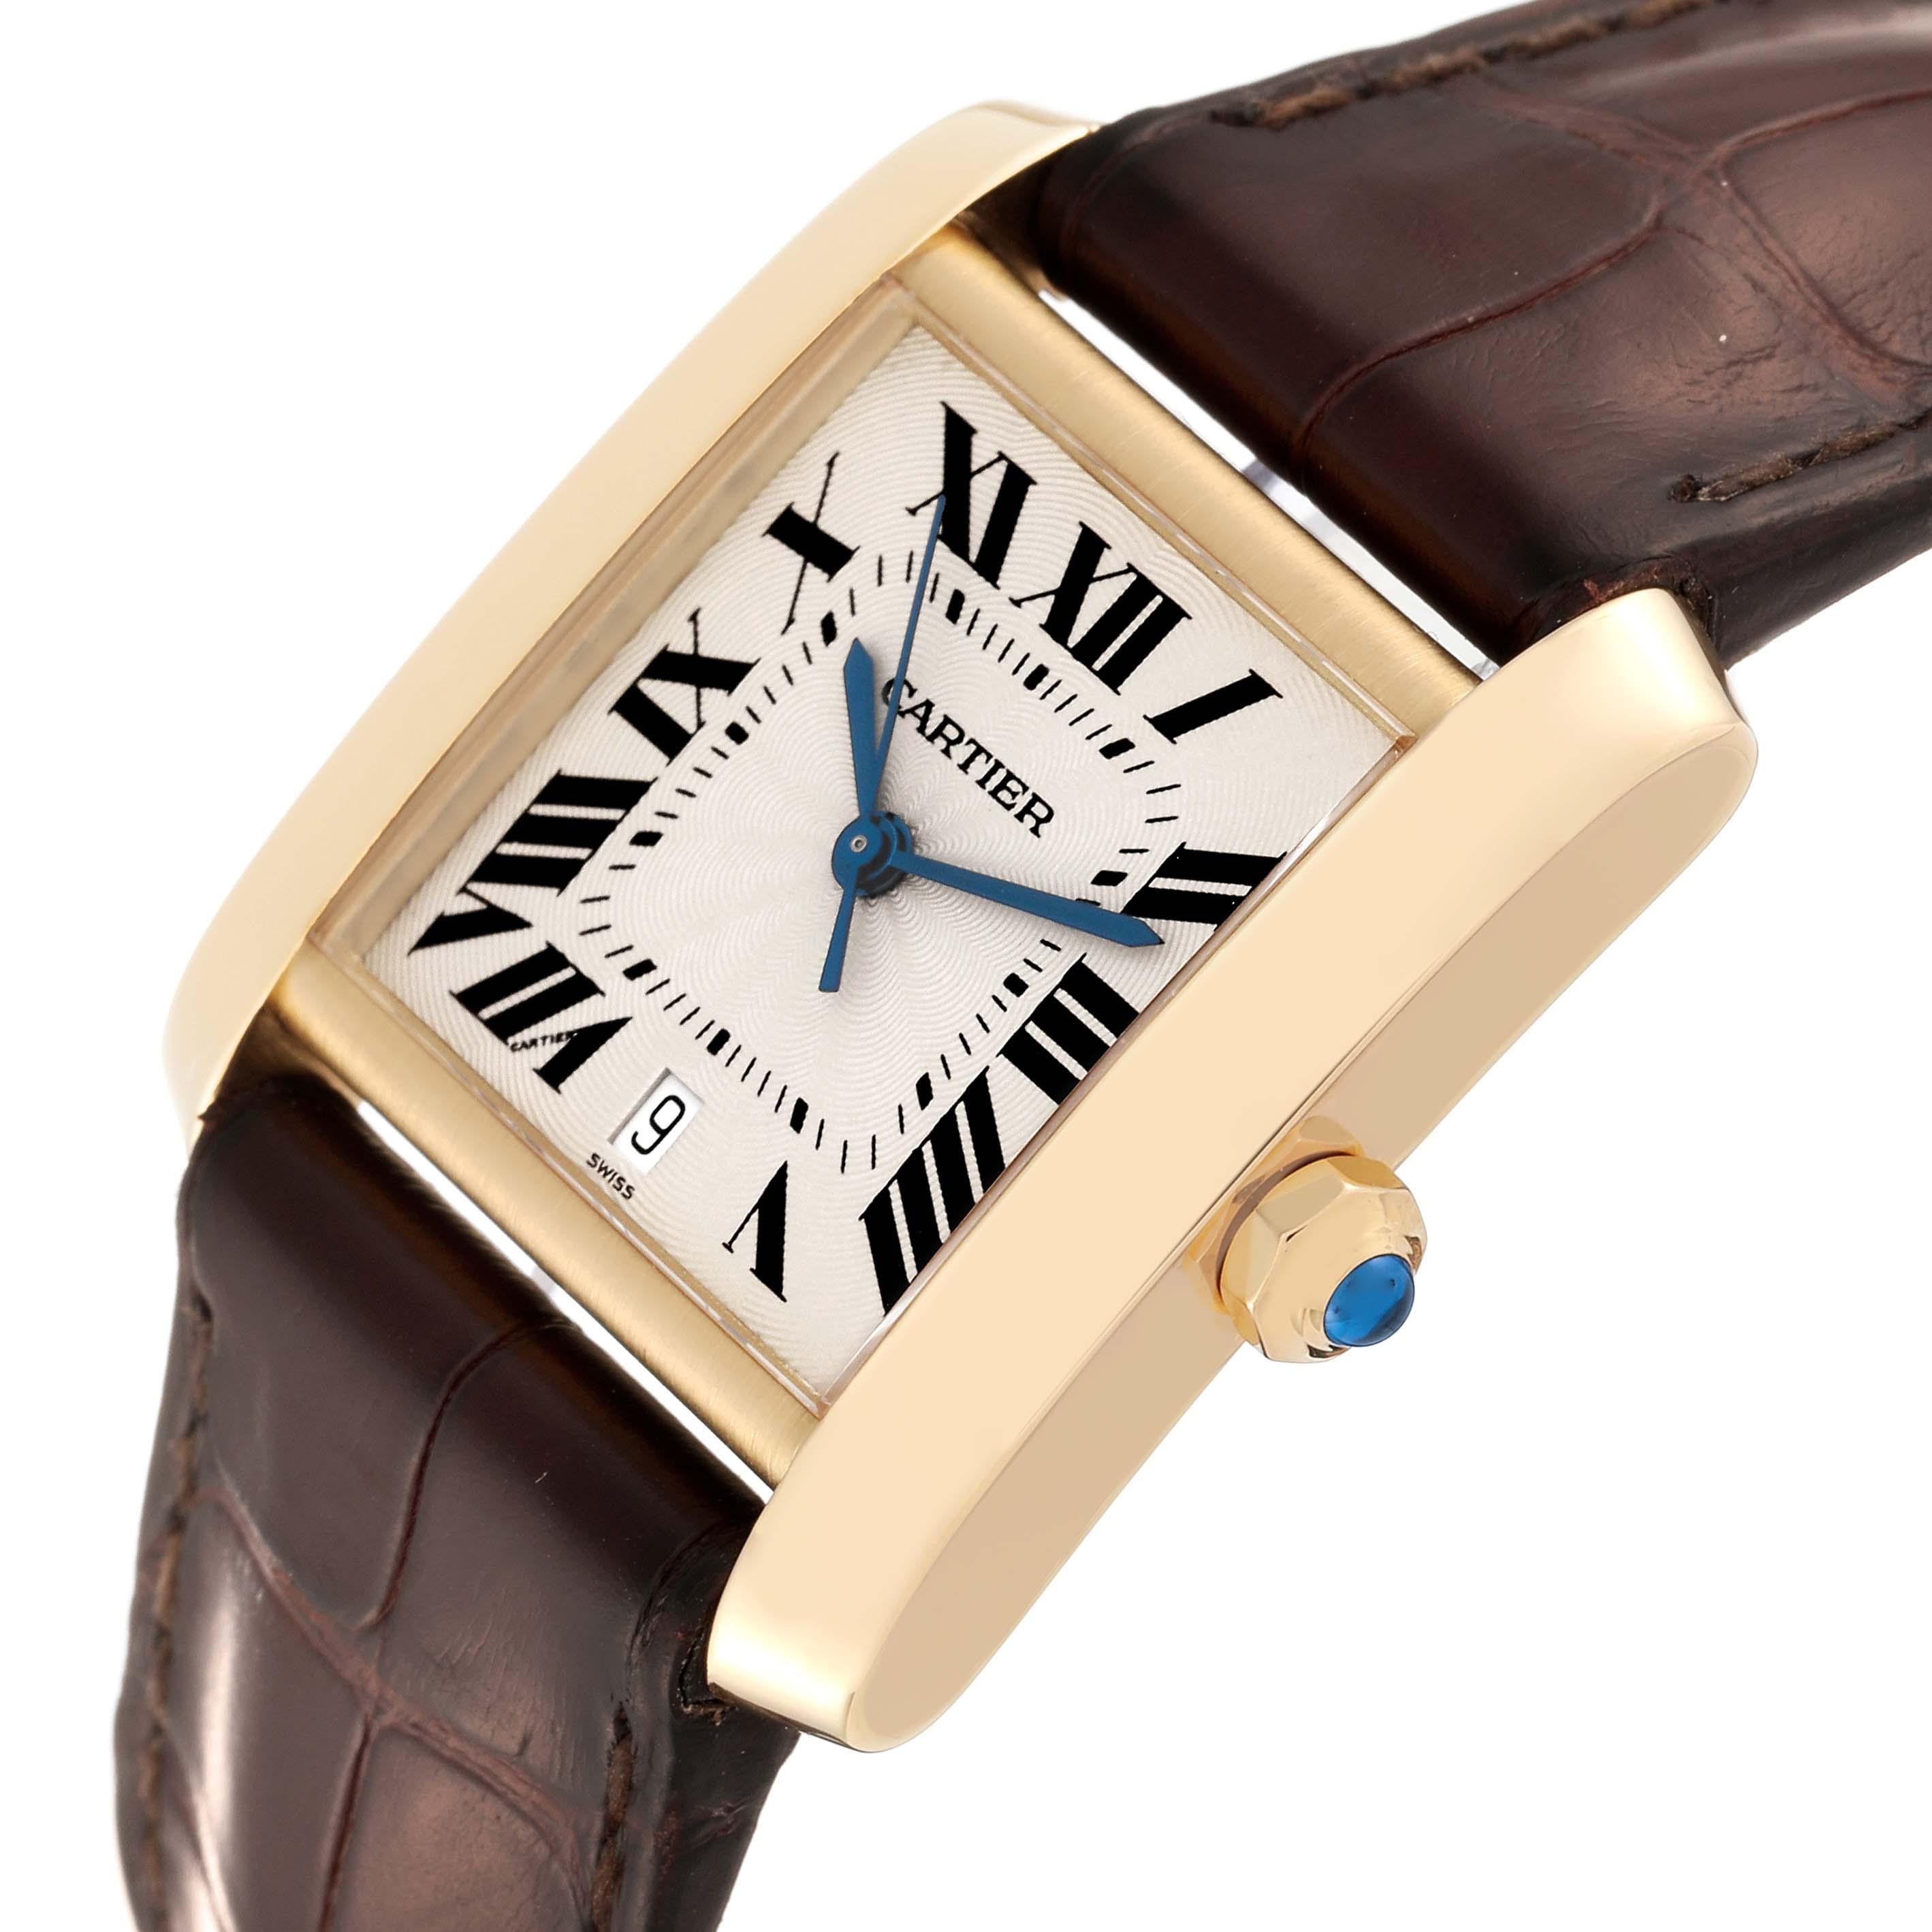 Cartier Tank Francaise Large Yellow Gold Automatic Mens Watch W5000156 1